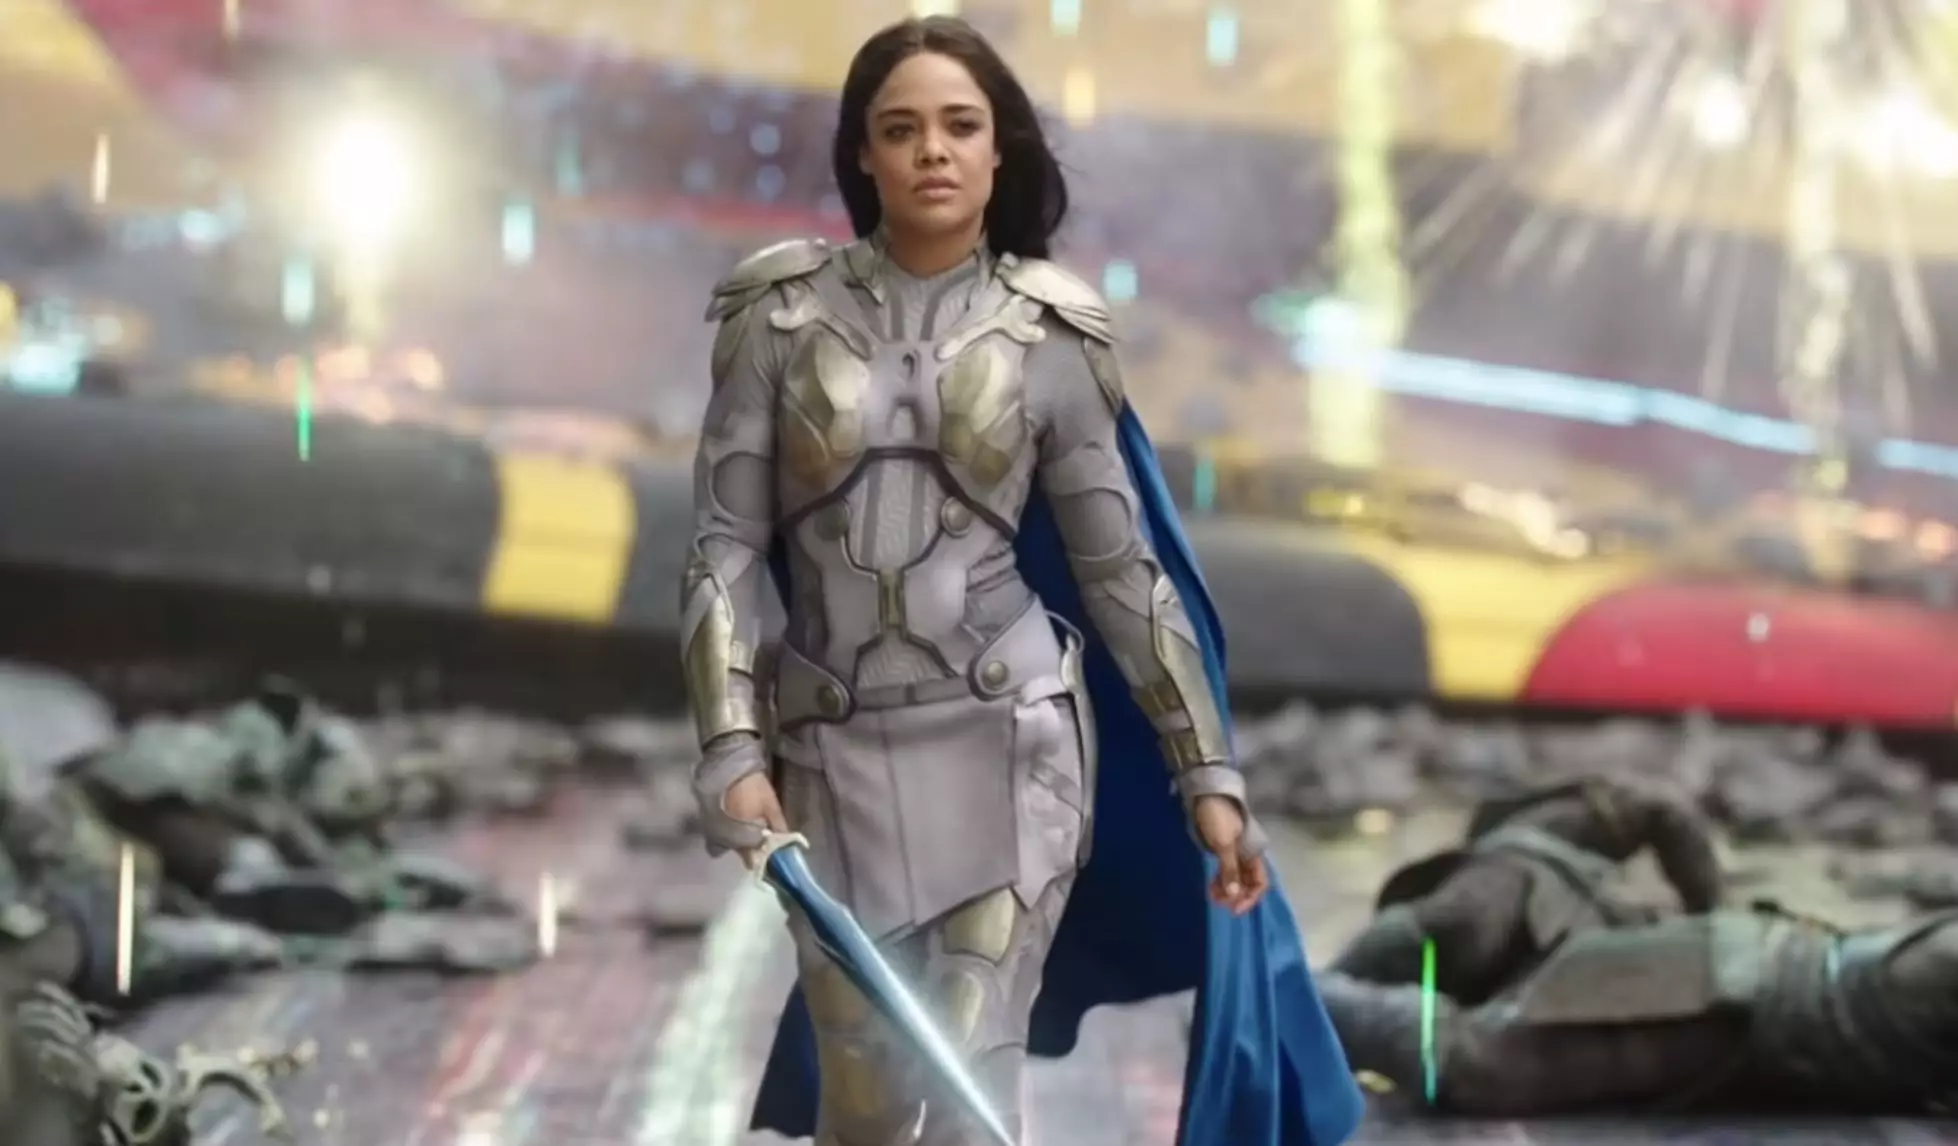 Valkyrie is in Thor: Love and Thunder (Credit:Twitter/loveandthundernews)